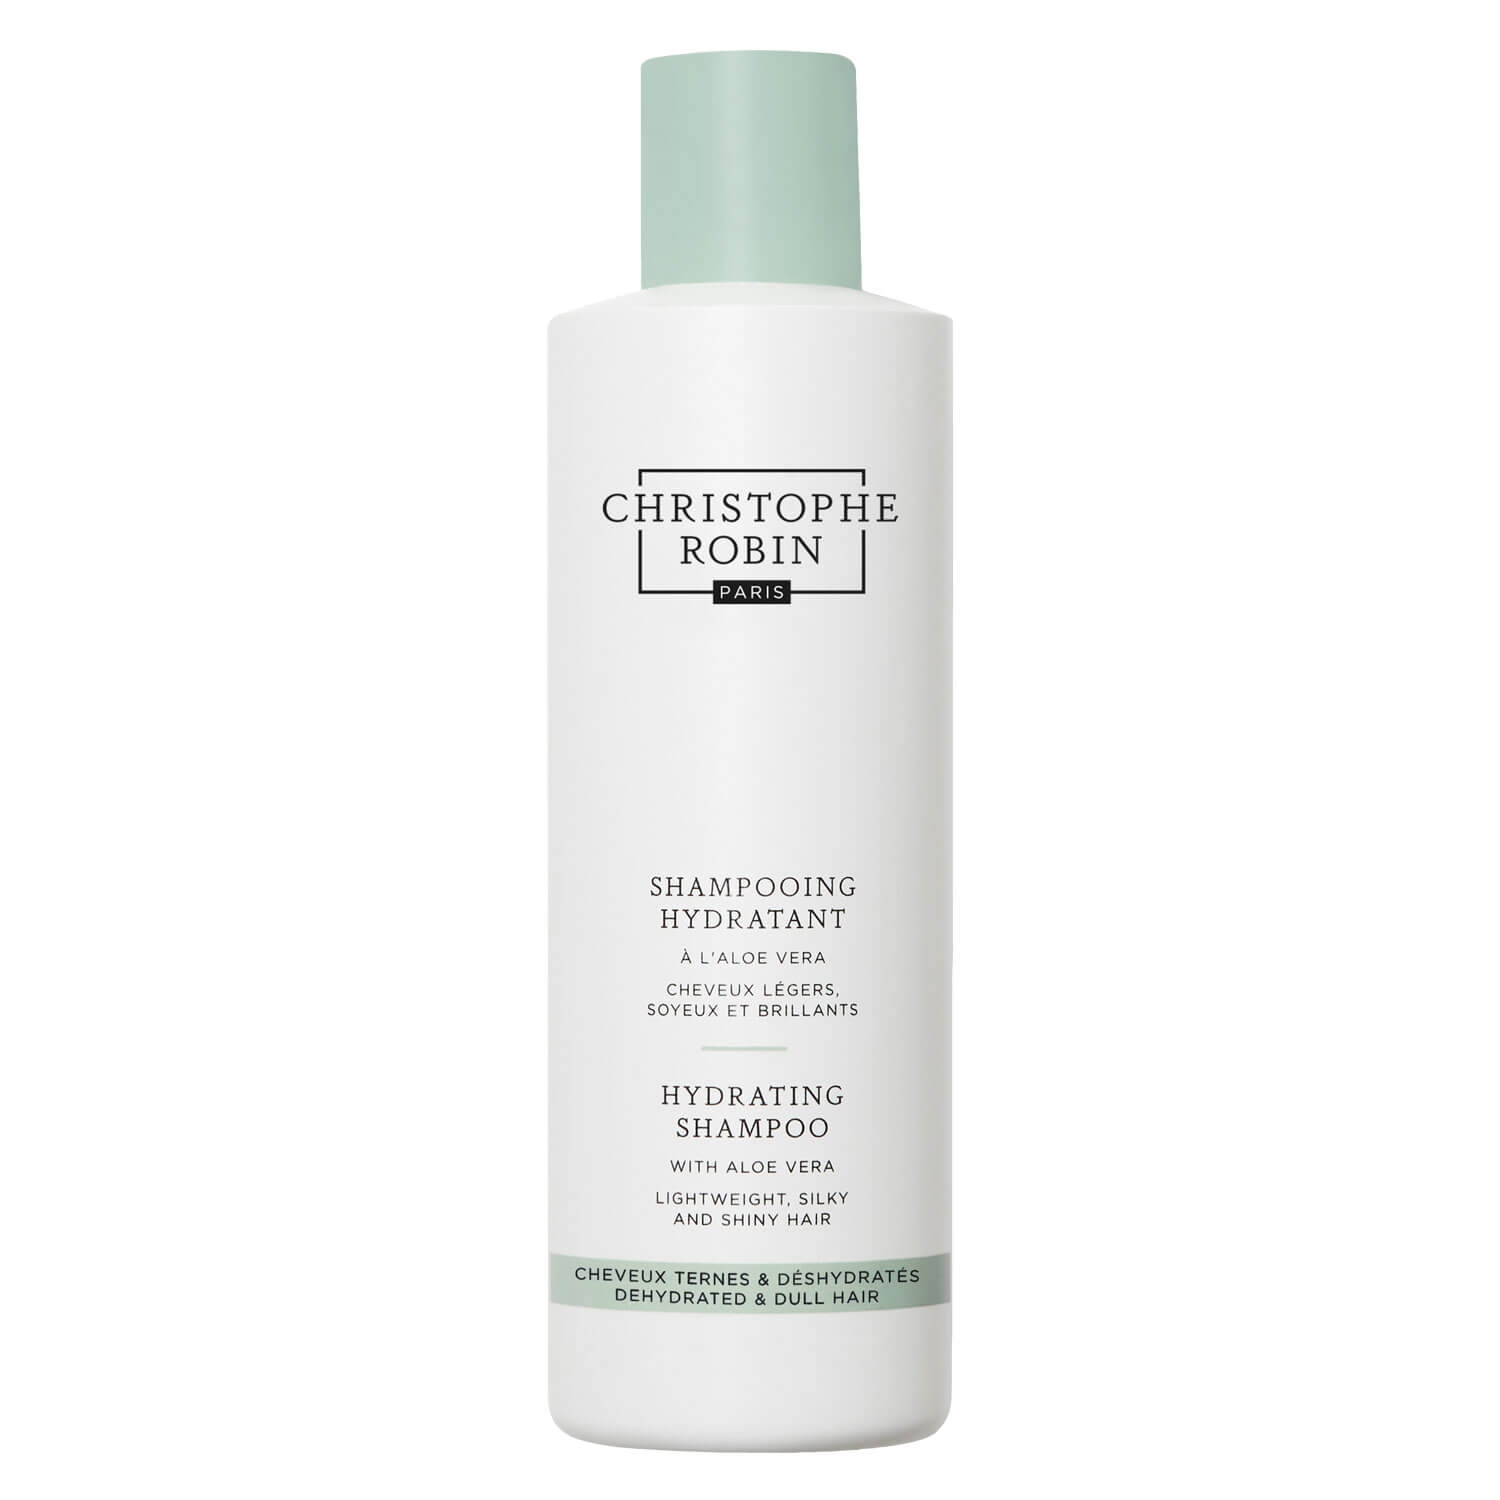 Product image from Christophe Robin - Shampooing Hydratant à l'Aloe Vera